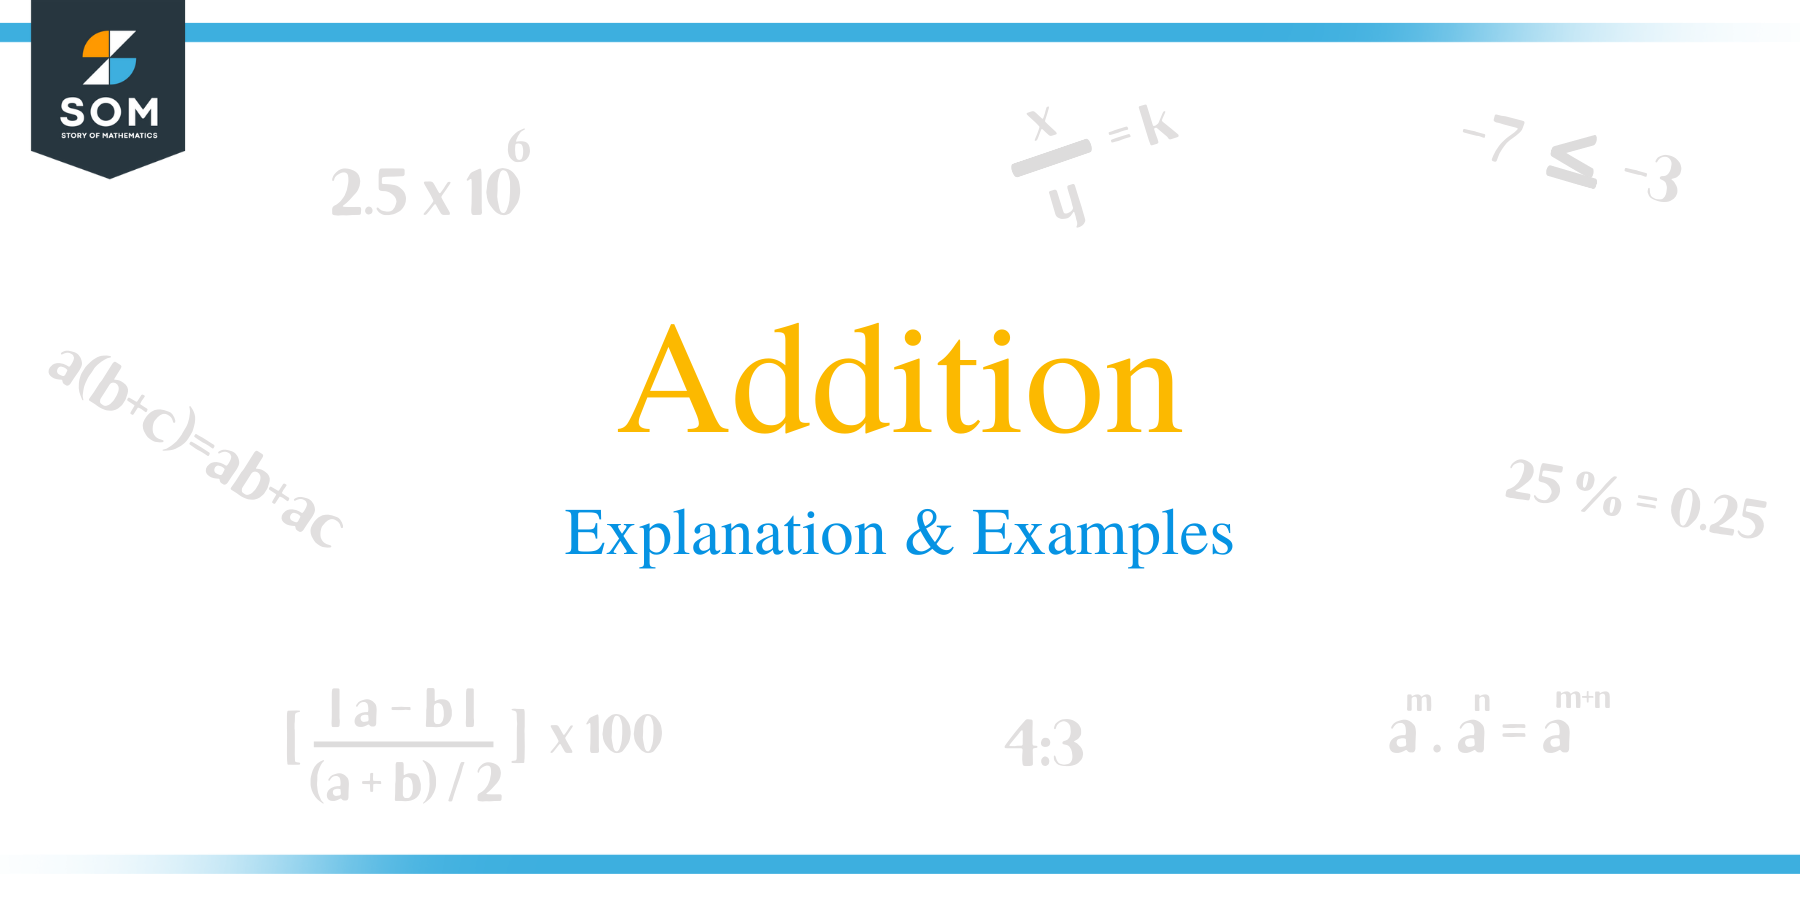 What is Addition